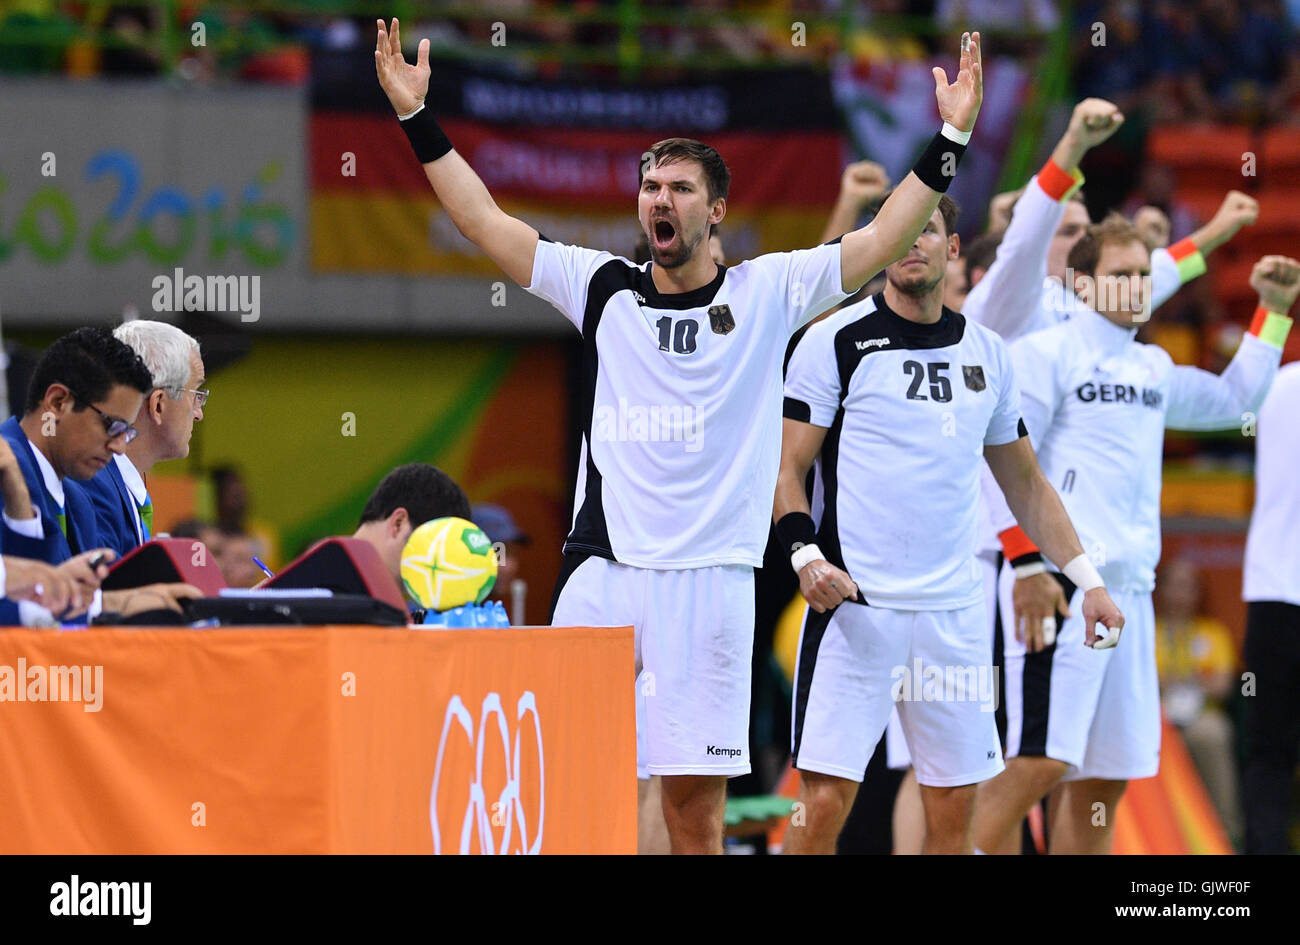 Rio de Janeiro, Brazil. 17th Aug, 2016. Fabian Wiede of Germany reacts during the Men's Quarterfinal match between Germany and Qatar of the Handball events during the Rio 2016 Olympic Games at the Carioca 2 Arena in the Olympic Park in Rio de Janeiro, Brazil, 17 August 2016. Photo: Lukas Schulze/dpa/Alamy Live News Stock Photo